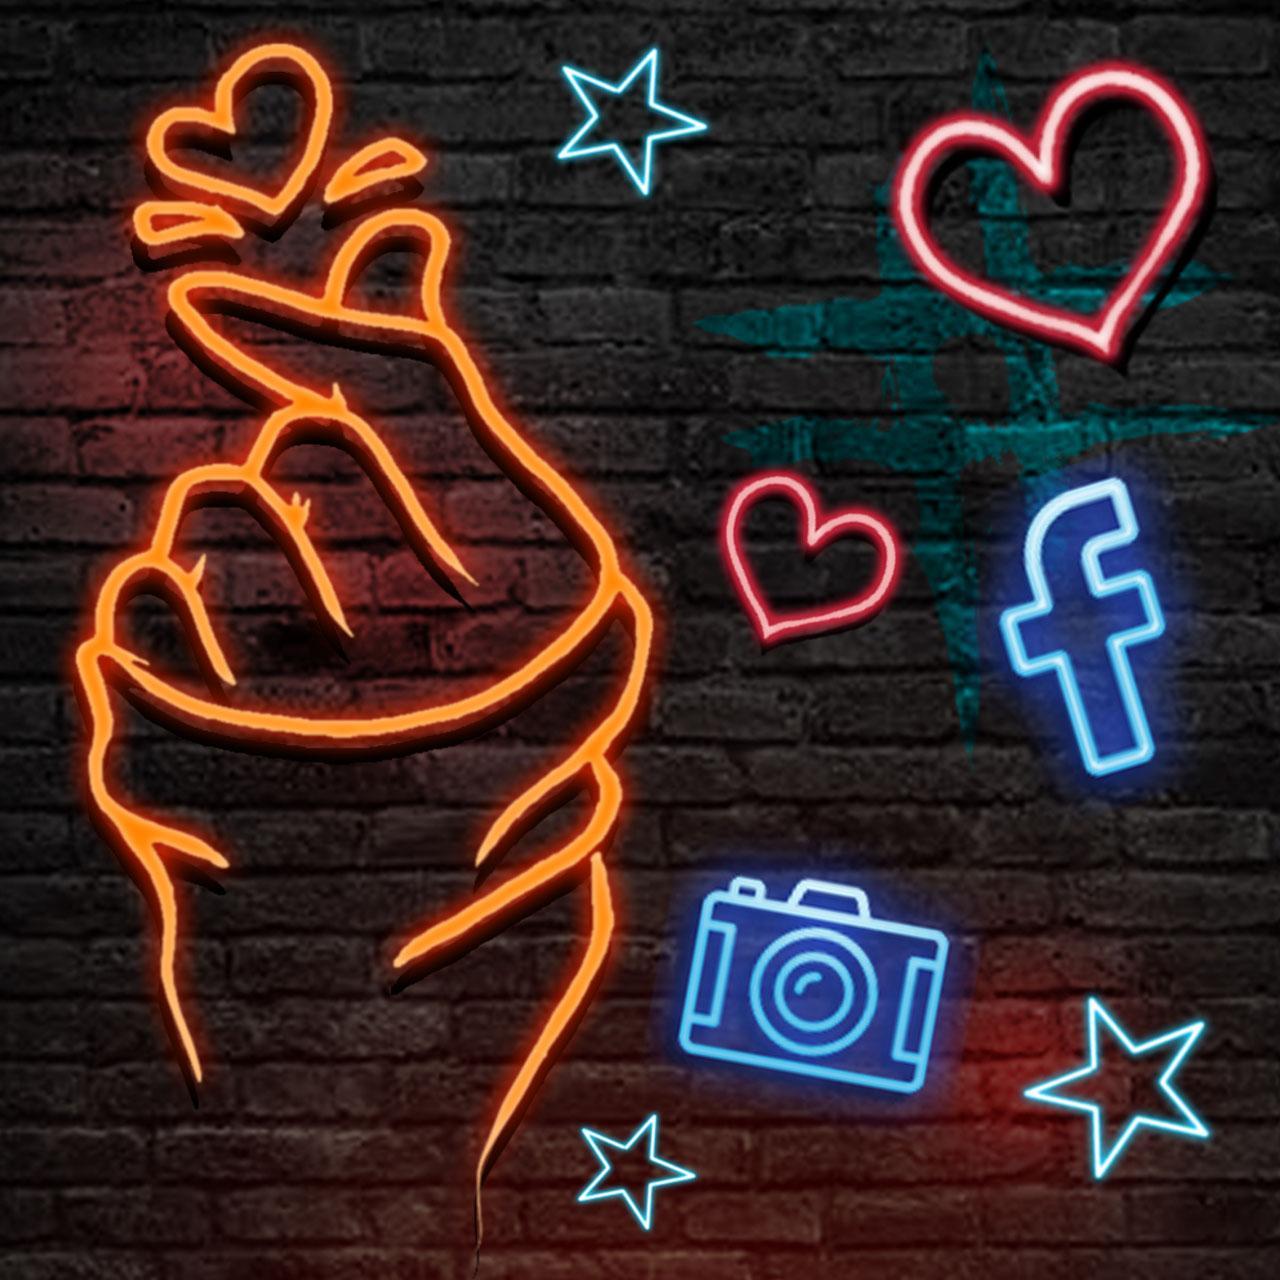 Neon, Led, Love Themes & Wallpaper for Android